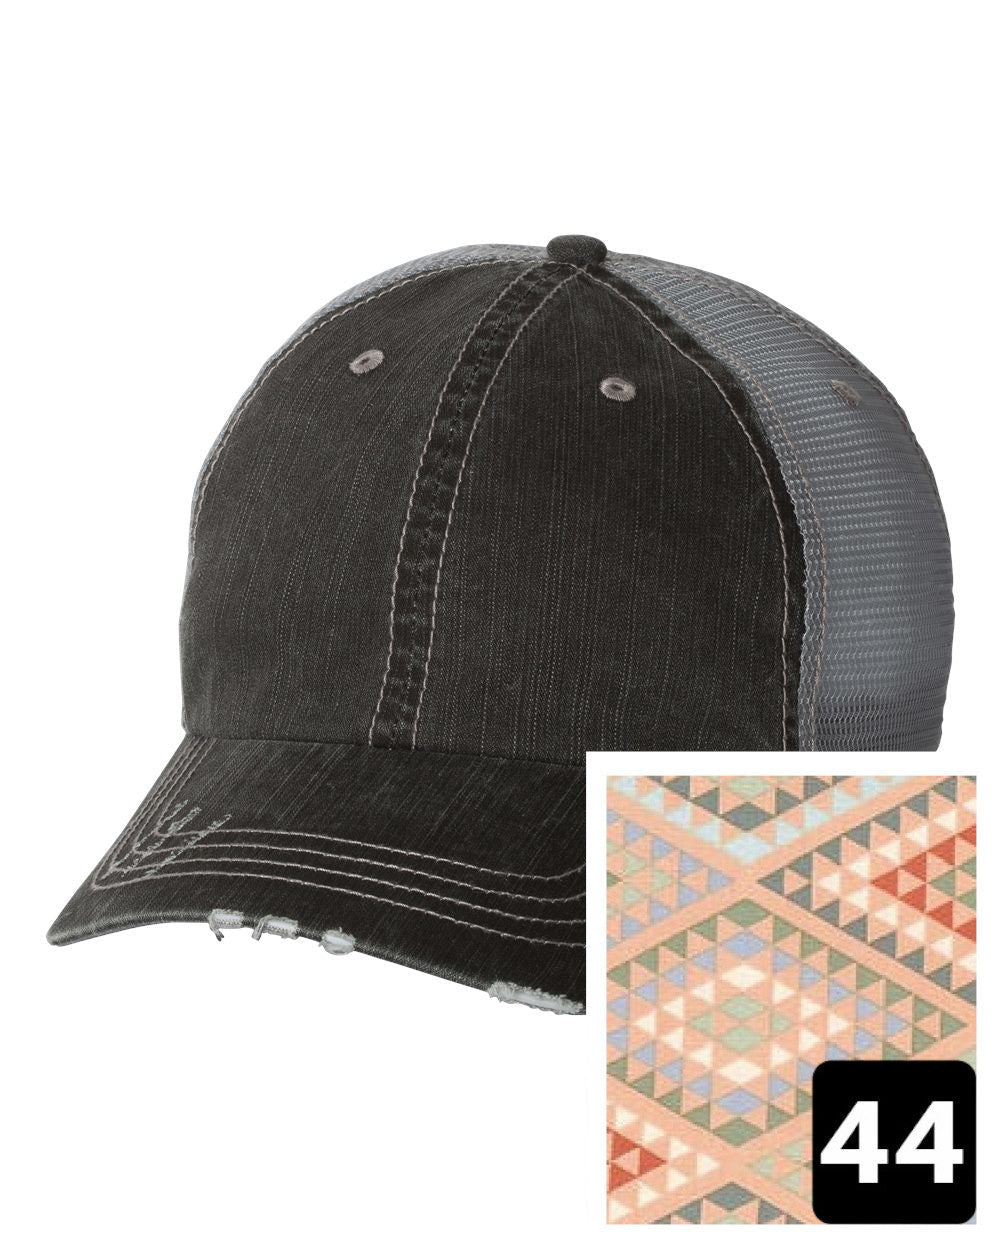 gray distressed trucker hat with navy coral and white chevron fabric state of Louisiana